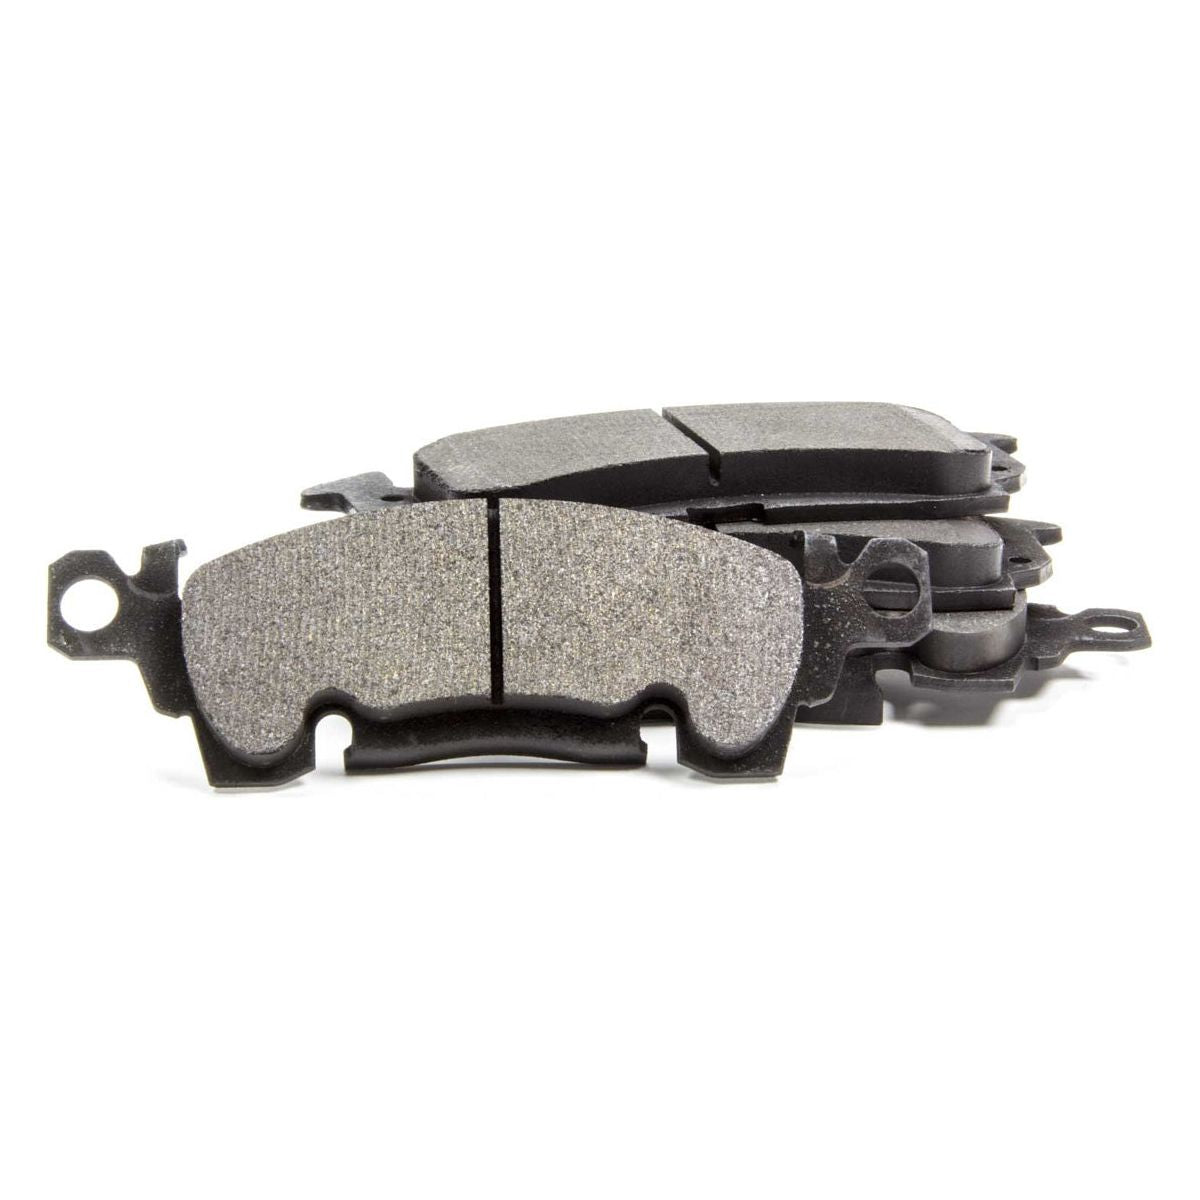 PFC PFR0052.01.14.44 Brake Pads Front 01 Compound All Temperatures Various GM Applications Set of 4